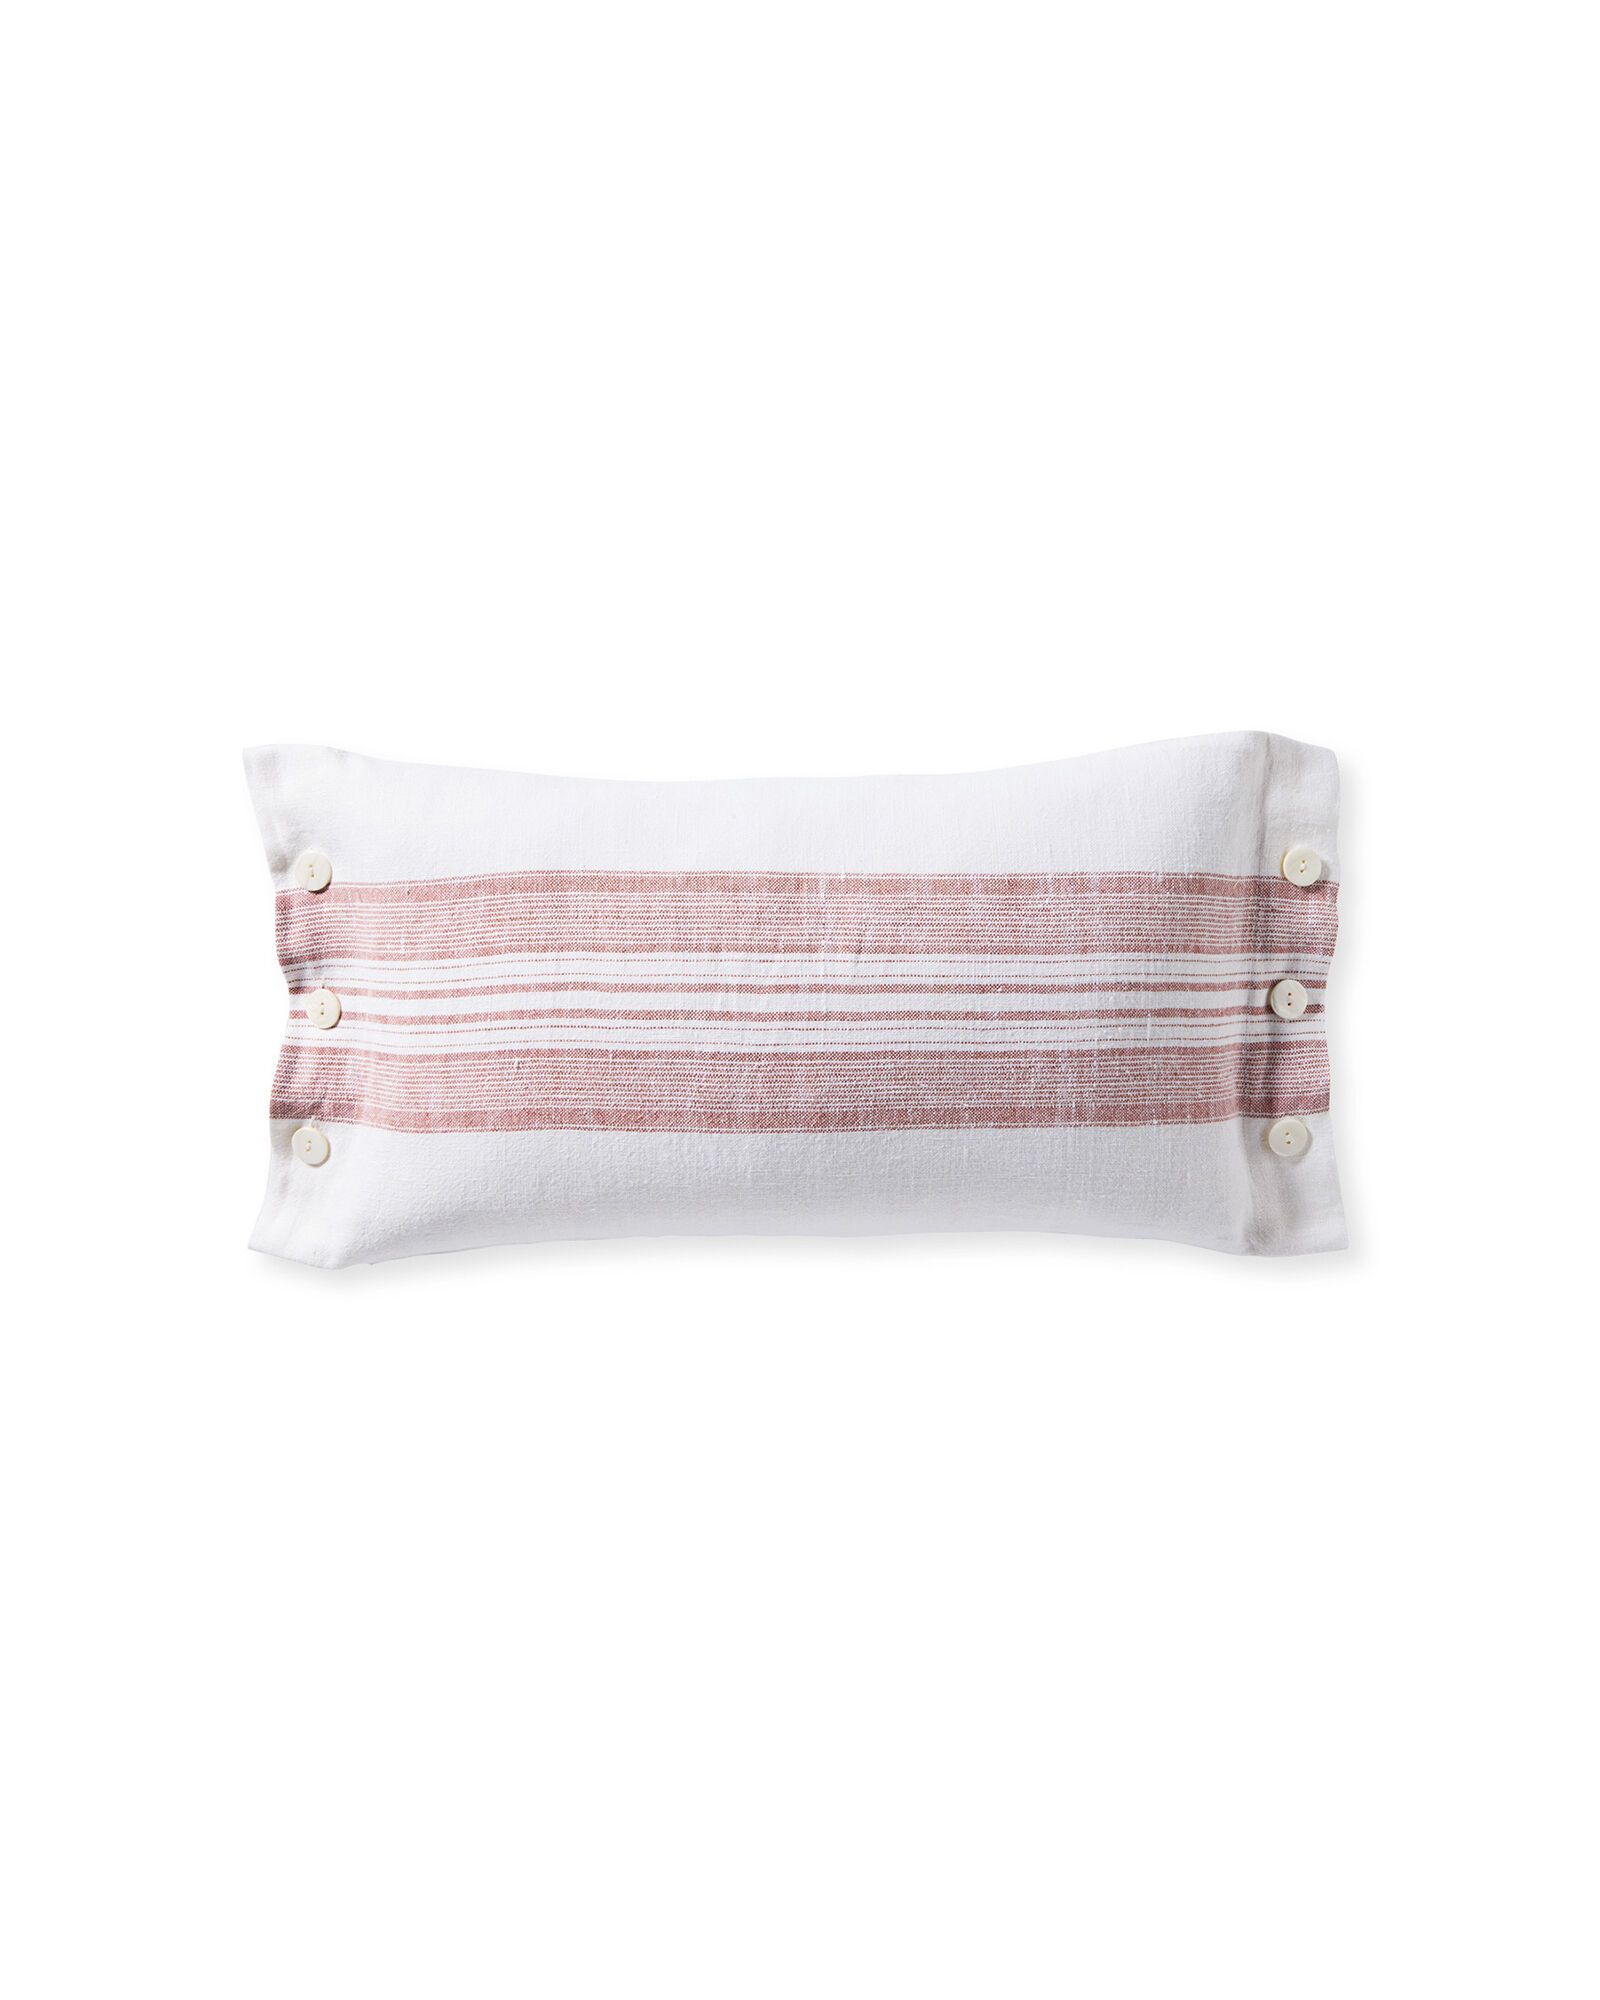 Shoreham Pillow Cover - Dusk | Serena and Lily